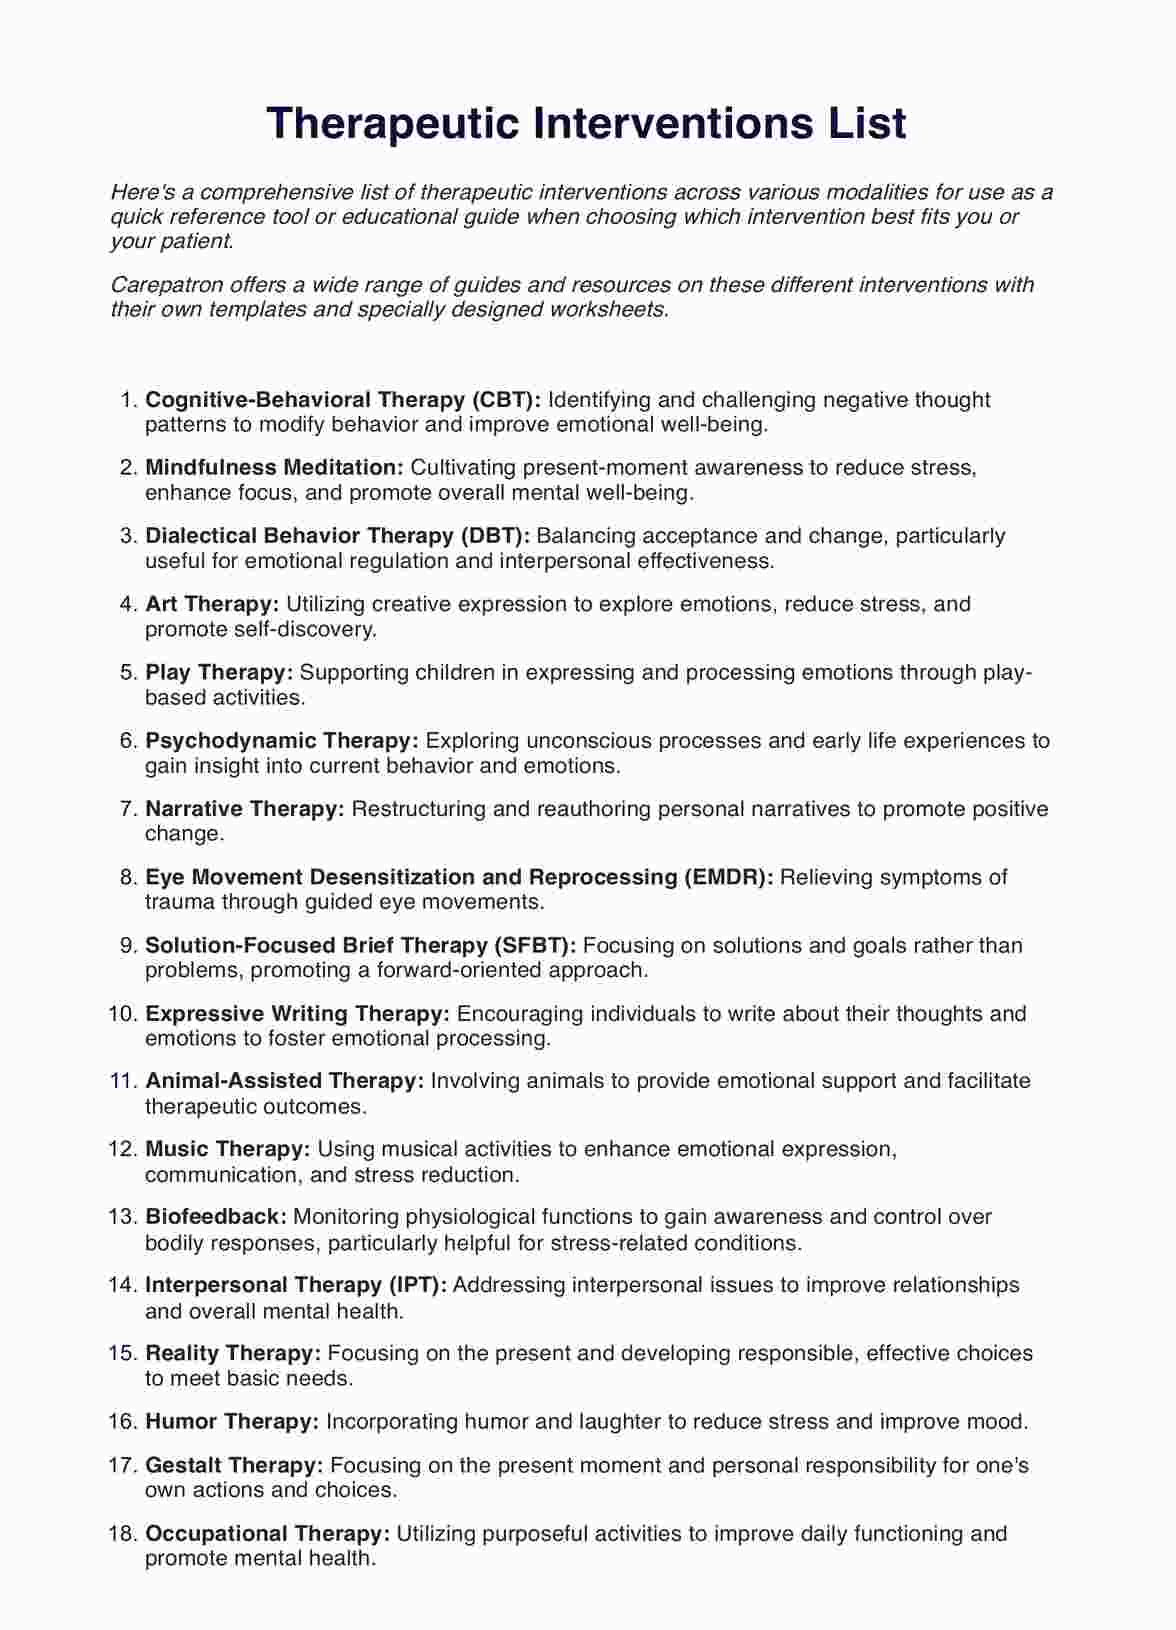 Therapeutic Interventions List PDF Example